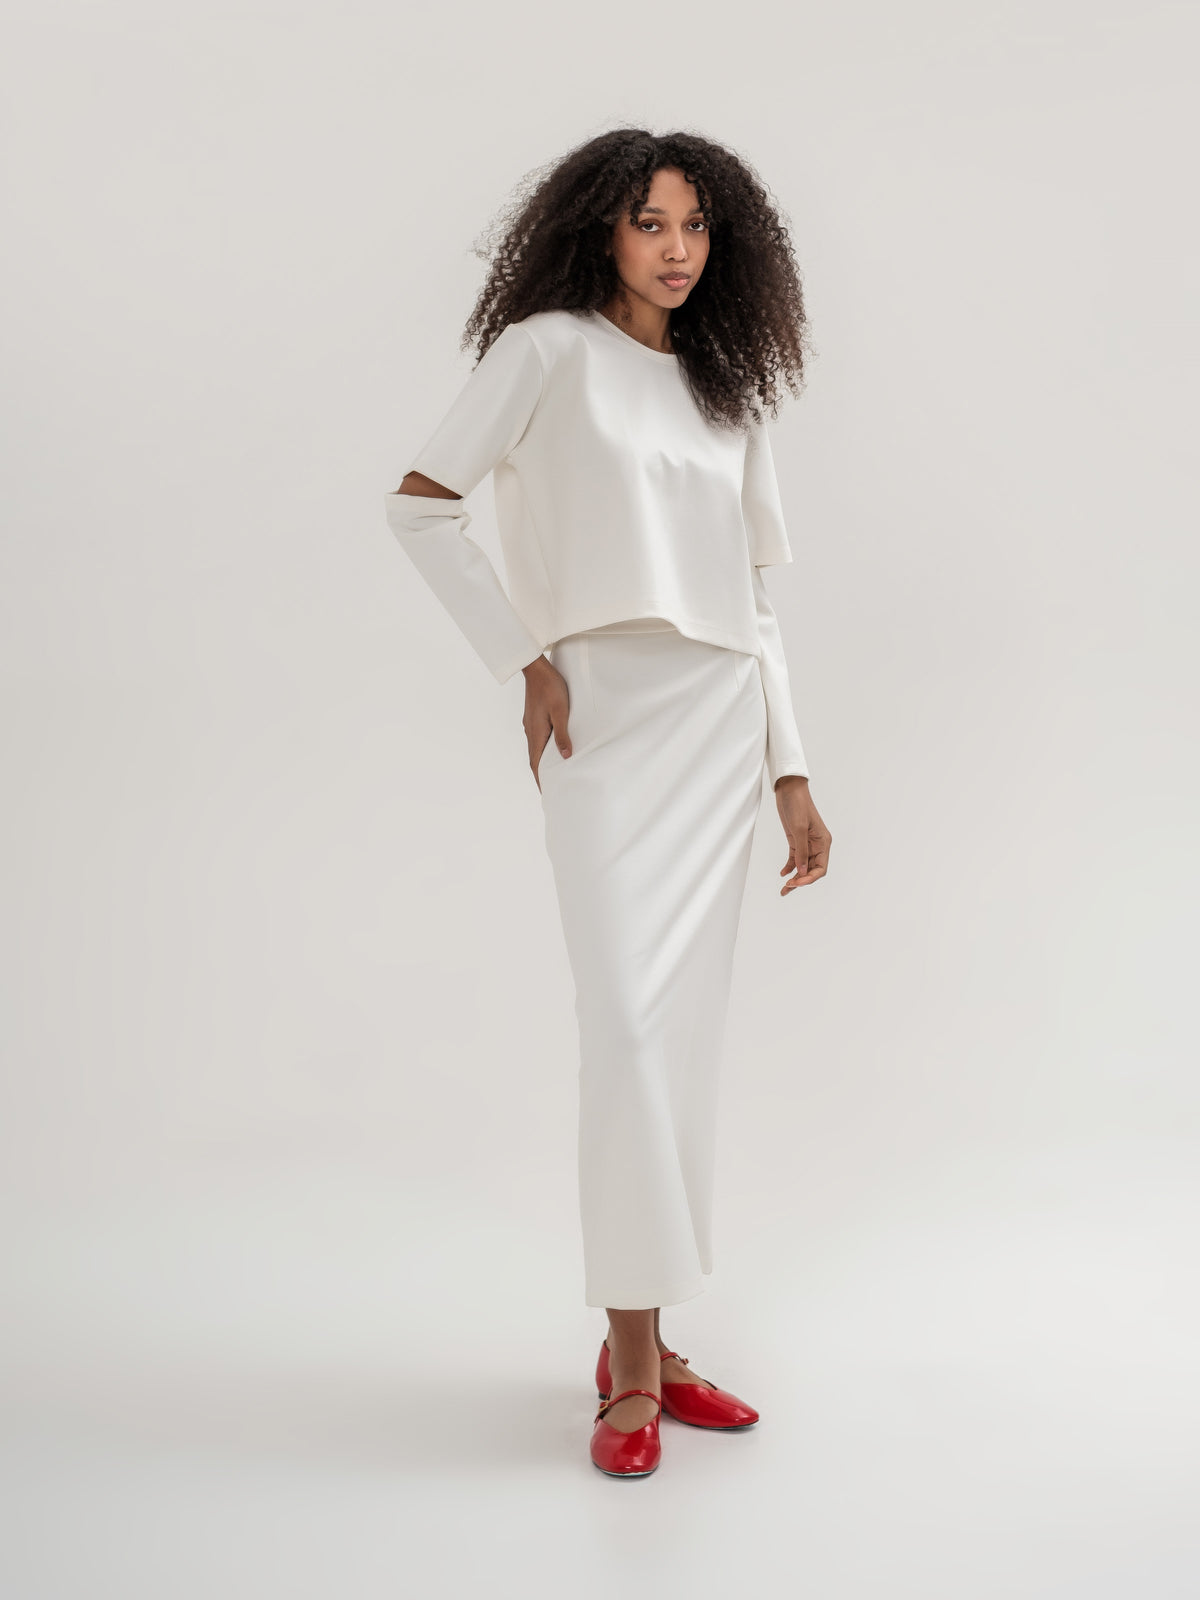 White top with slits in the elbow area and white straight long skirt with slit on the back